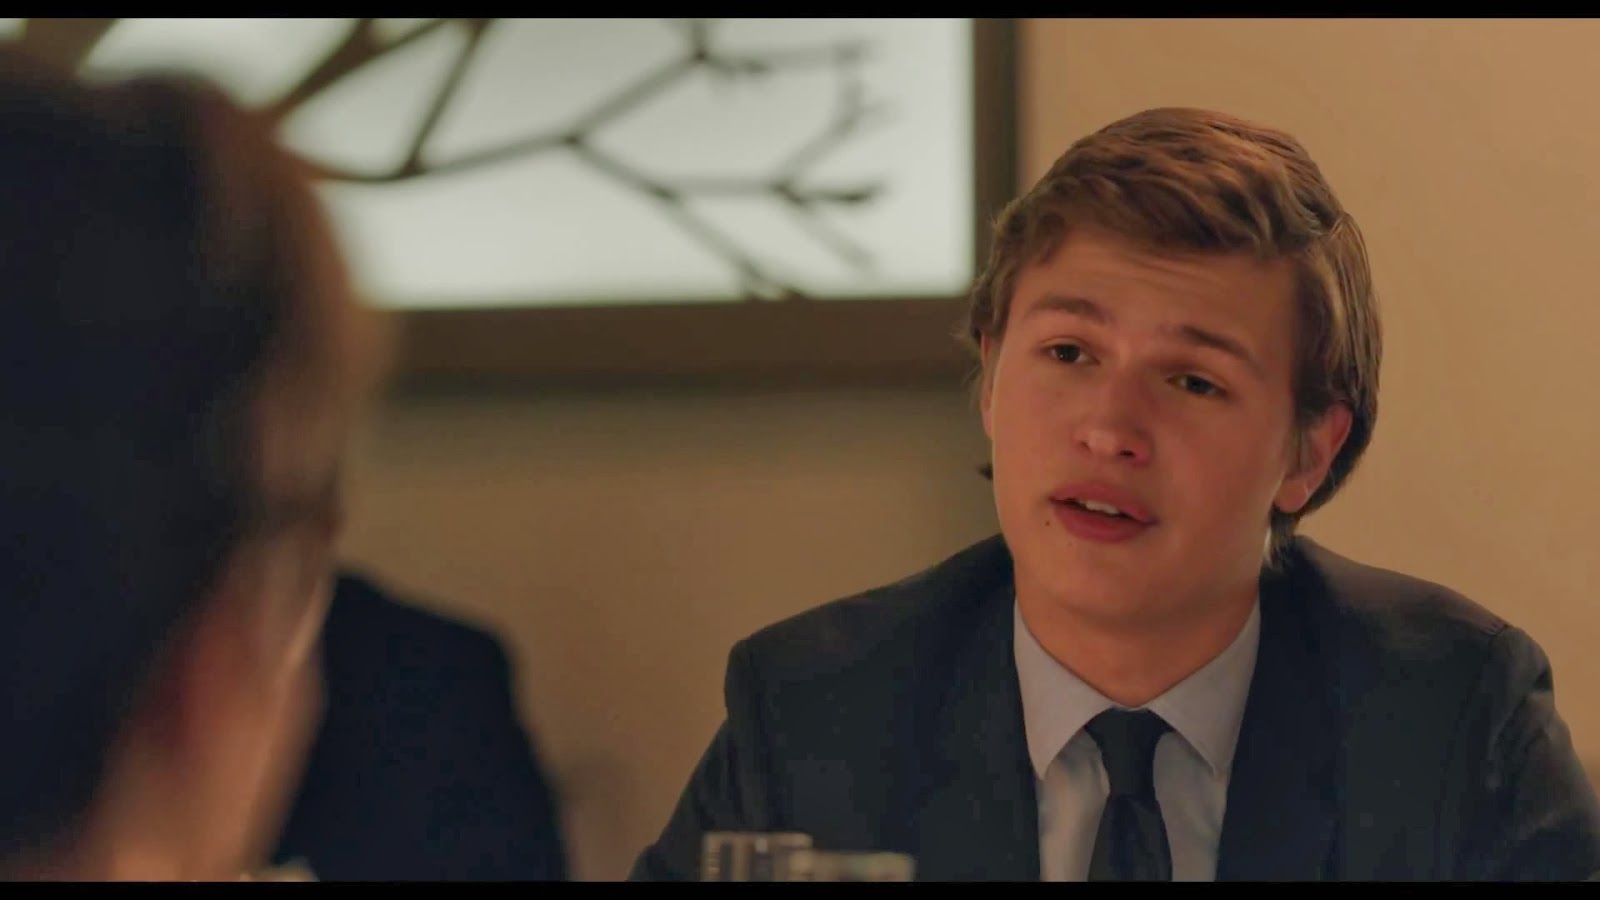 Trailer Stills of The Fault in Our Stars Movie - The Fault in Our Stars ...